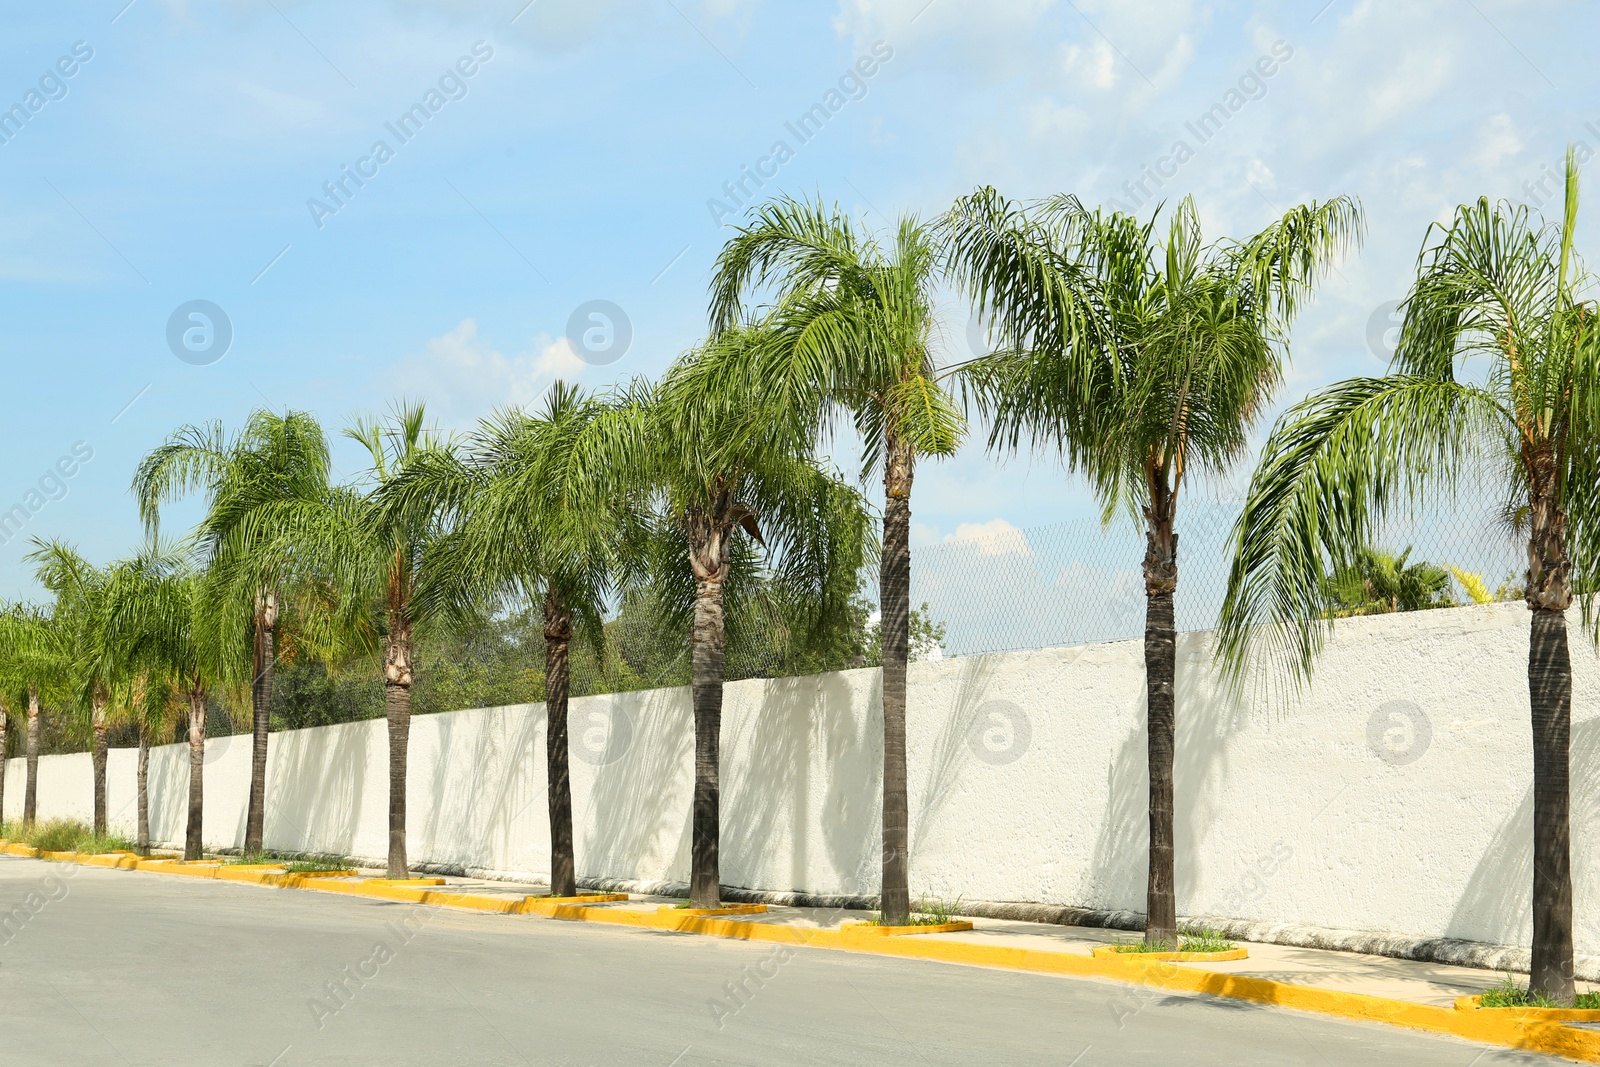 Photo of Beautiful palm trees growing near road in city